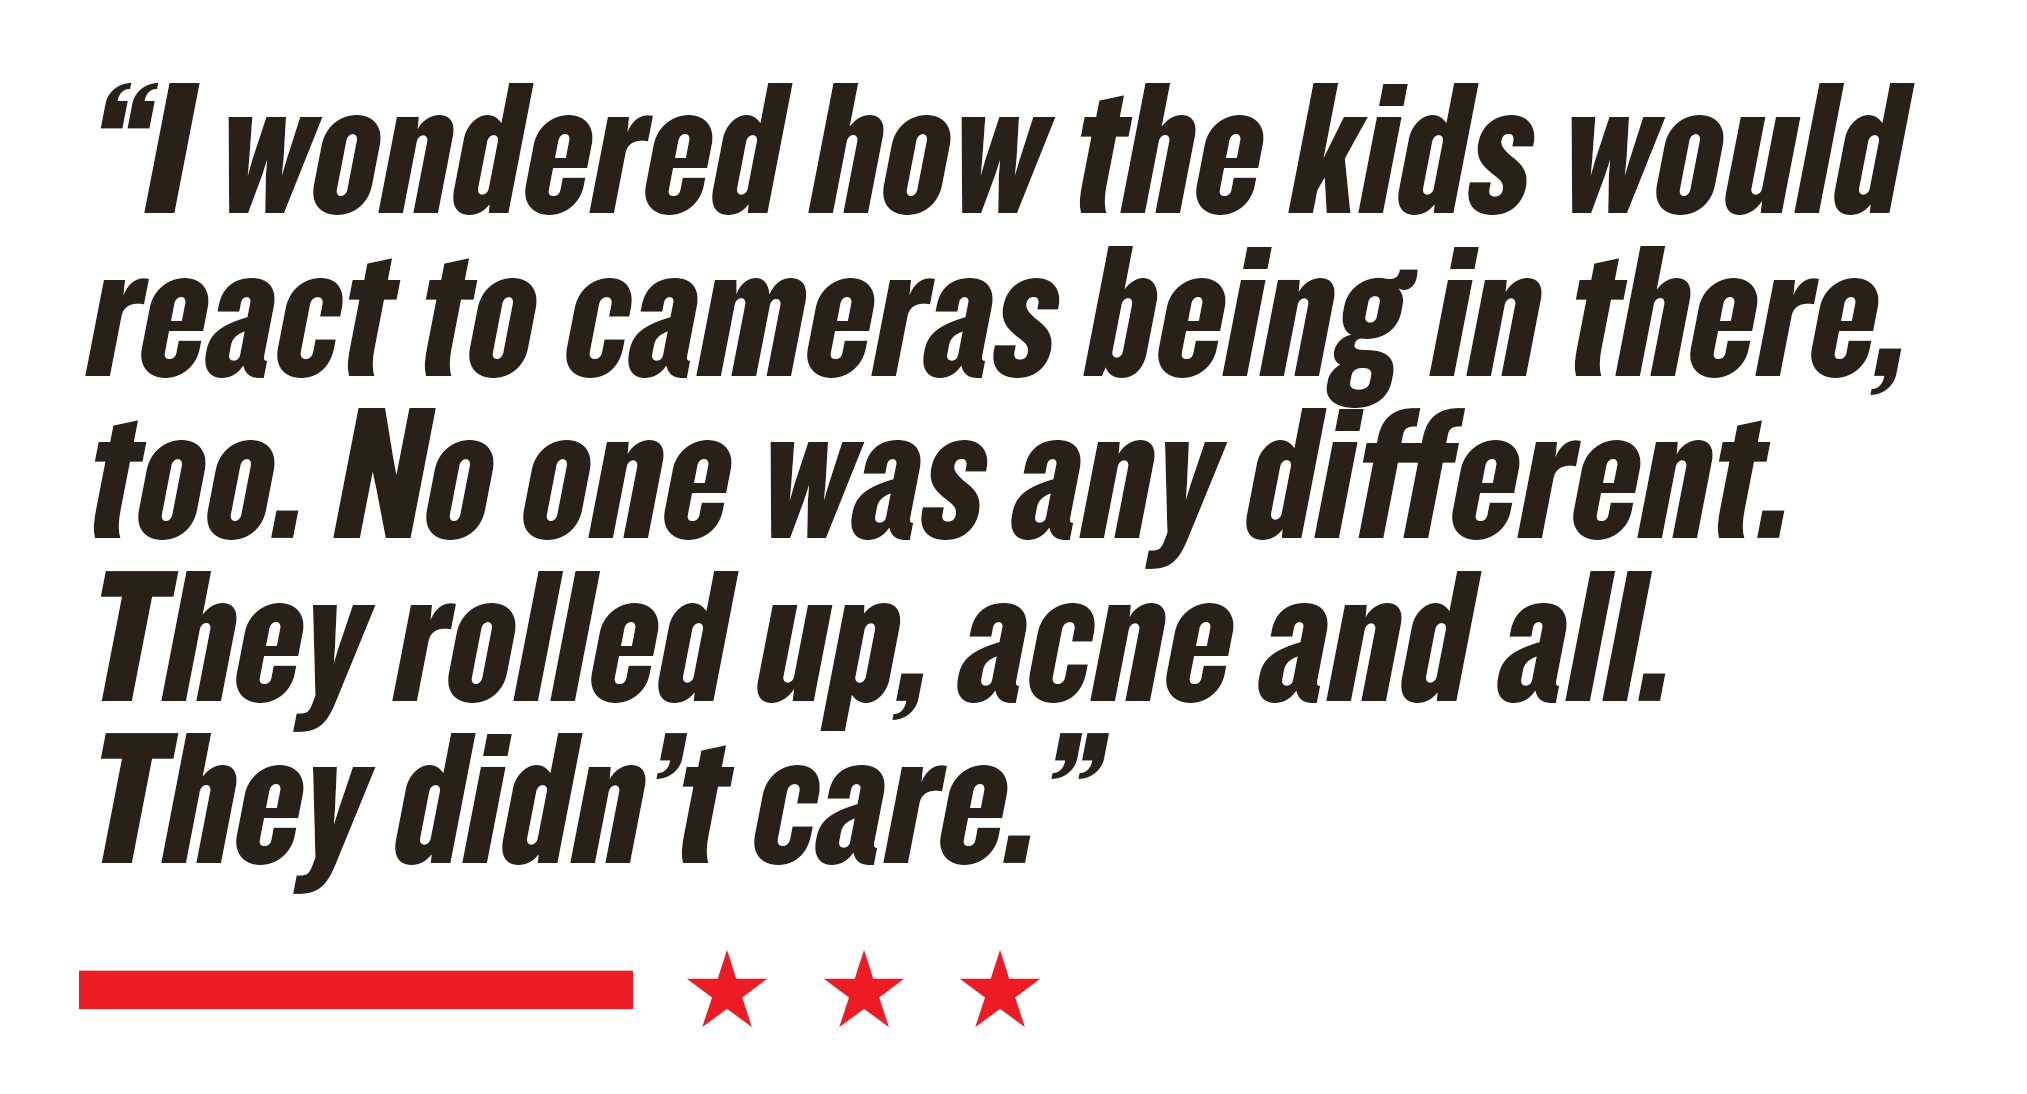 “I wondered how the kids would react to cameras being in there, too. No one was any different. They rolled up, acne and all. They didn’t care.” 